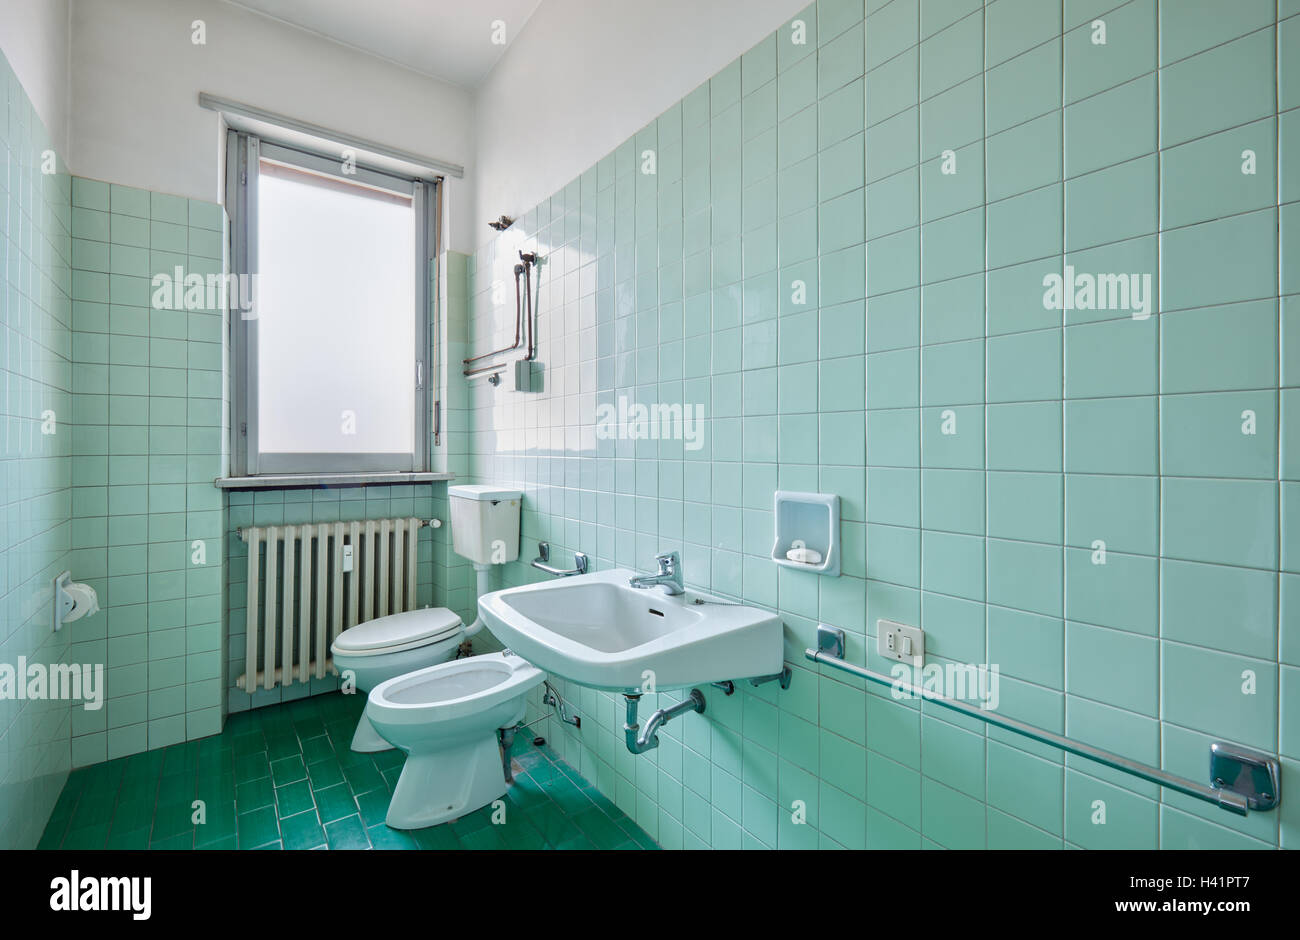 Old bathroom interior with green tiles Stock Photo